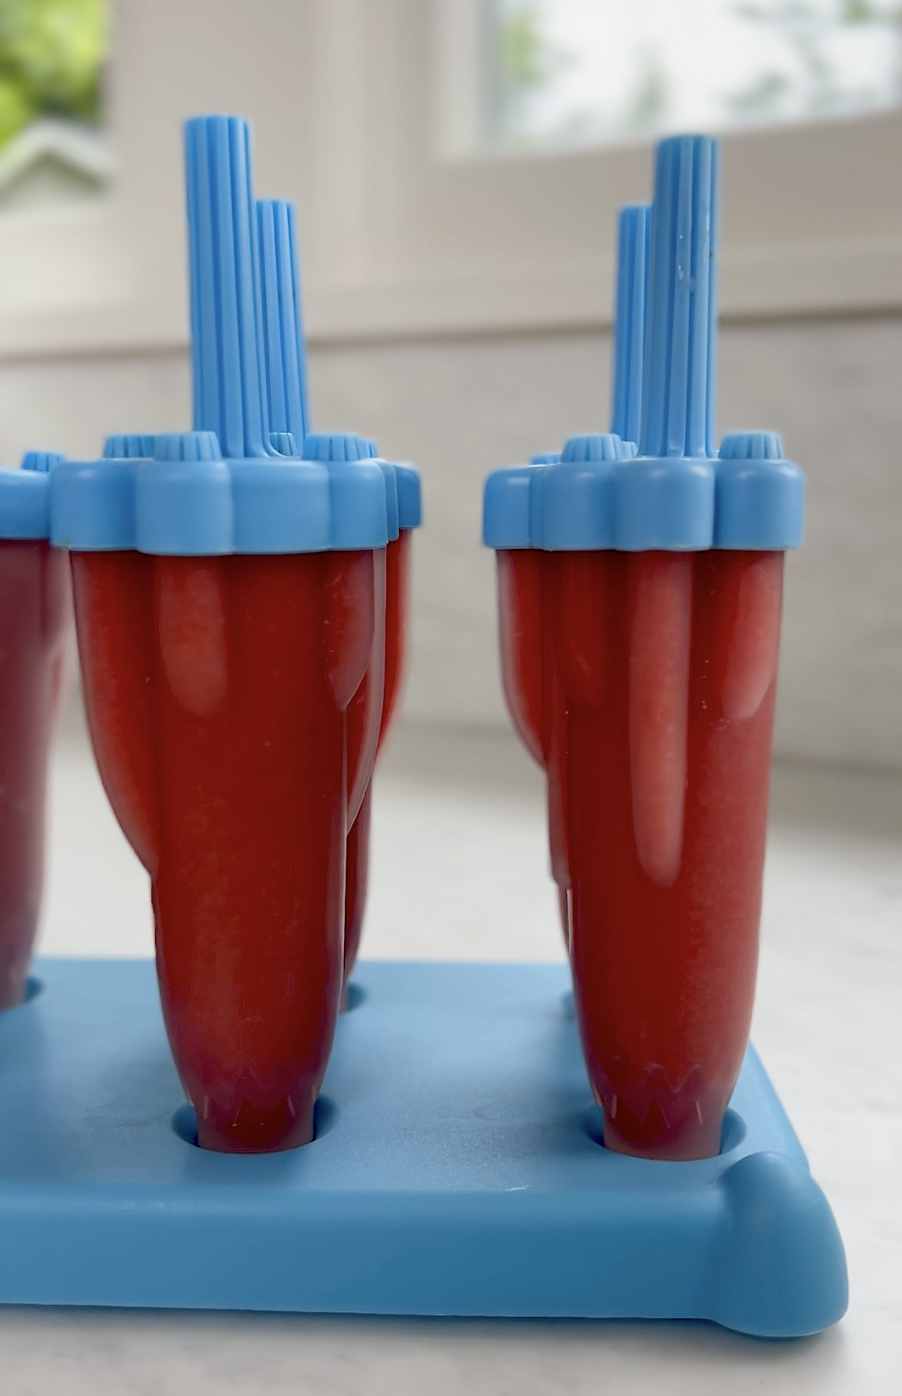 Strawberry Popsicles in molds.